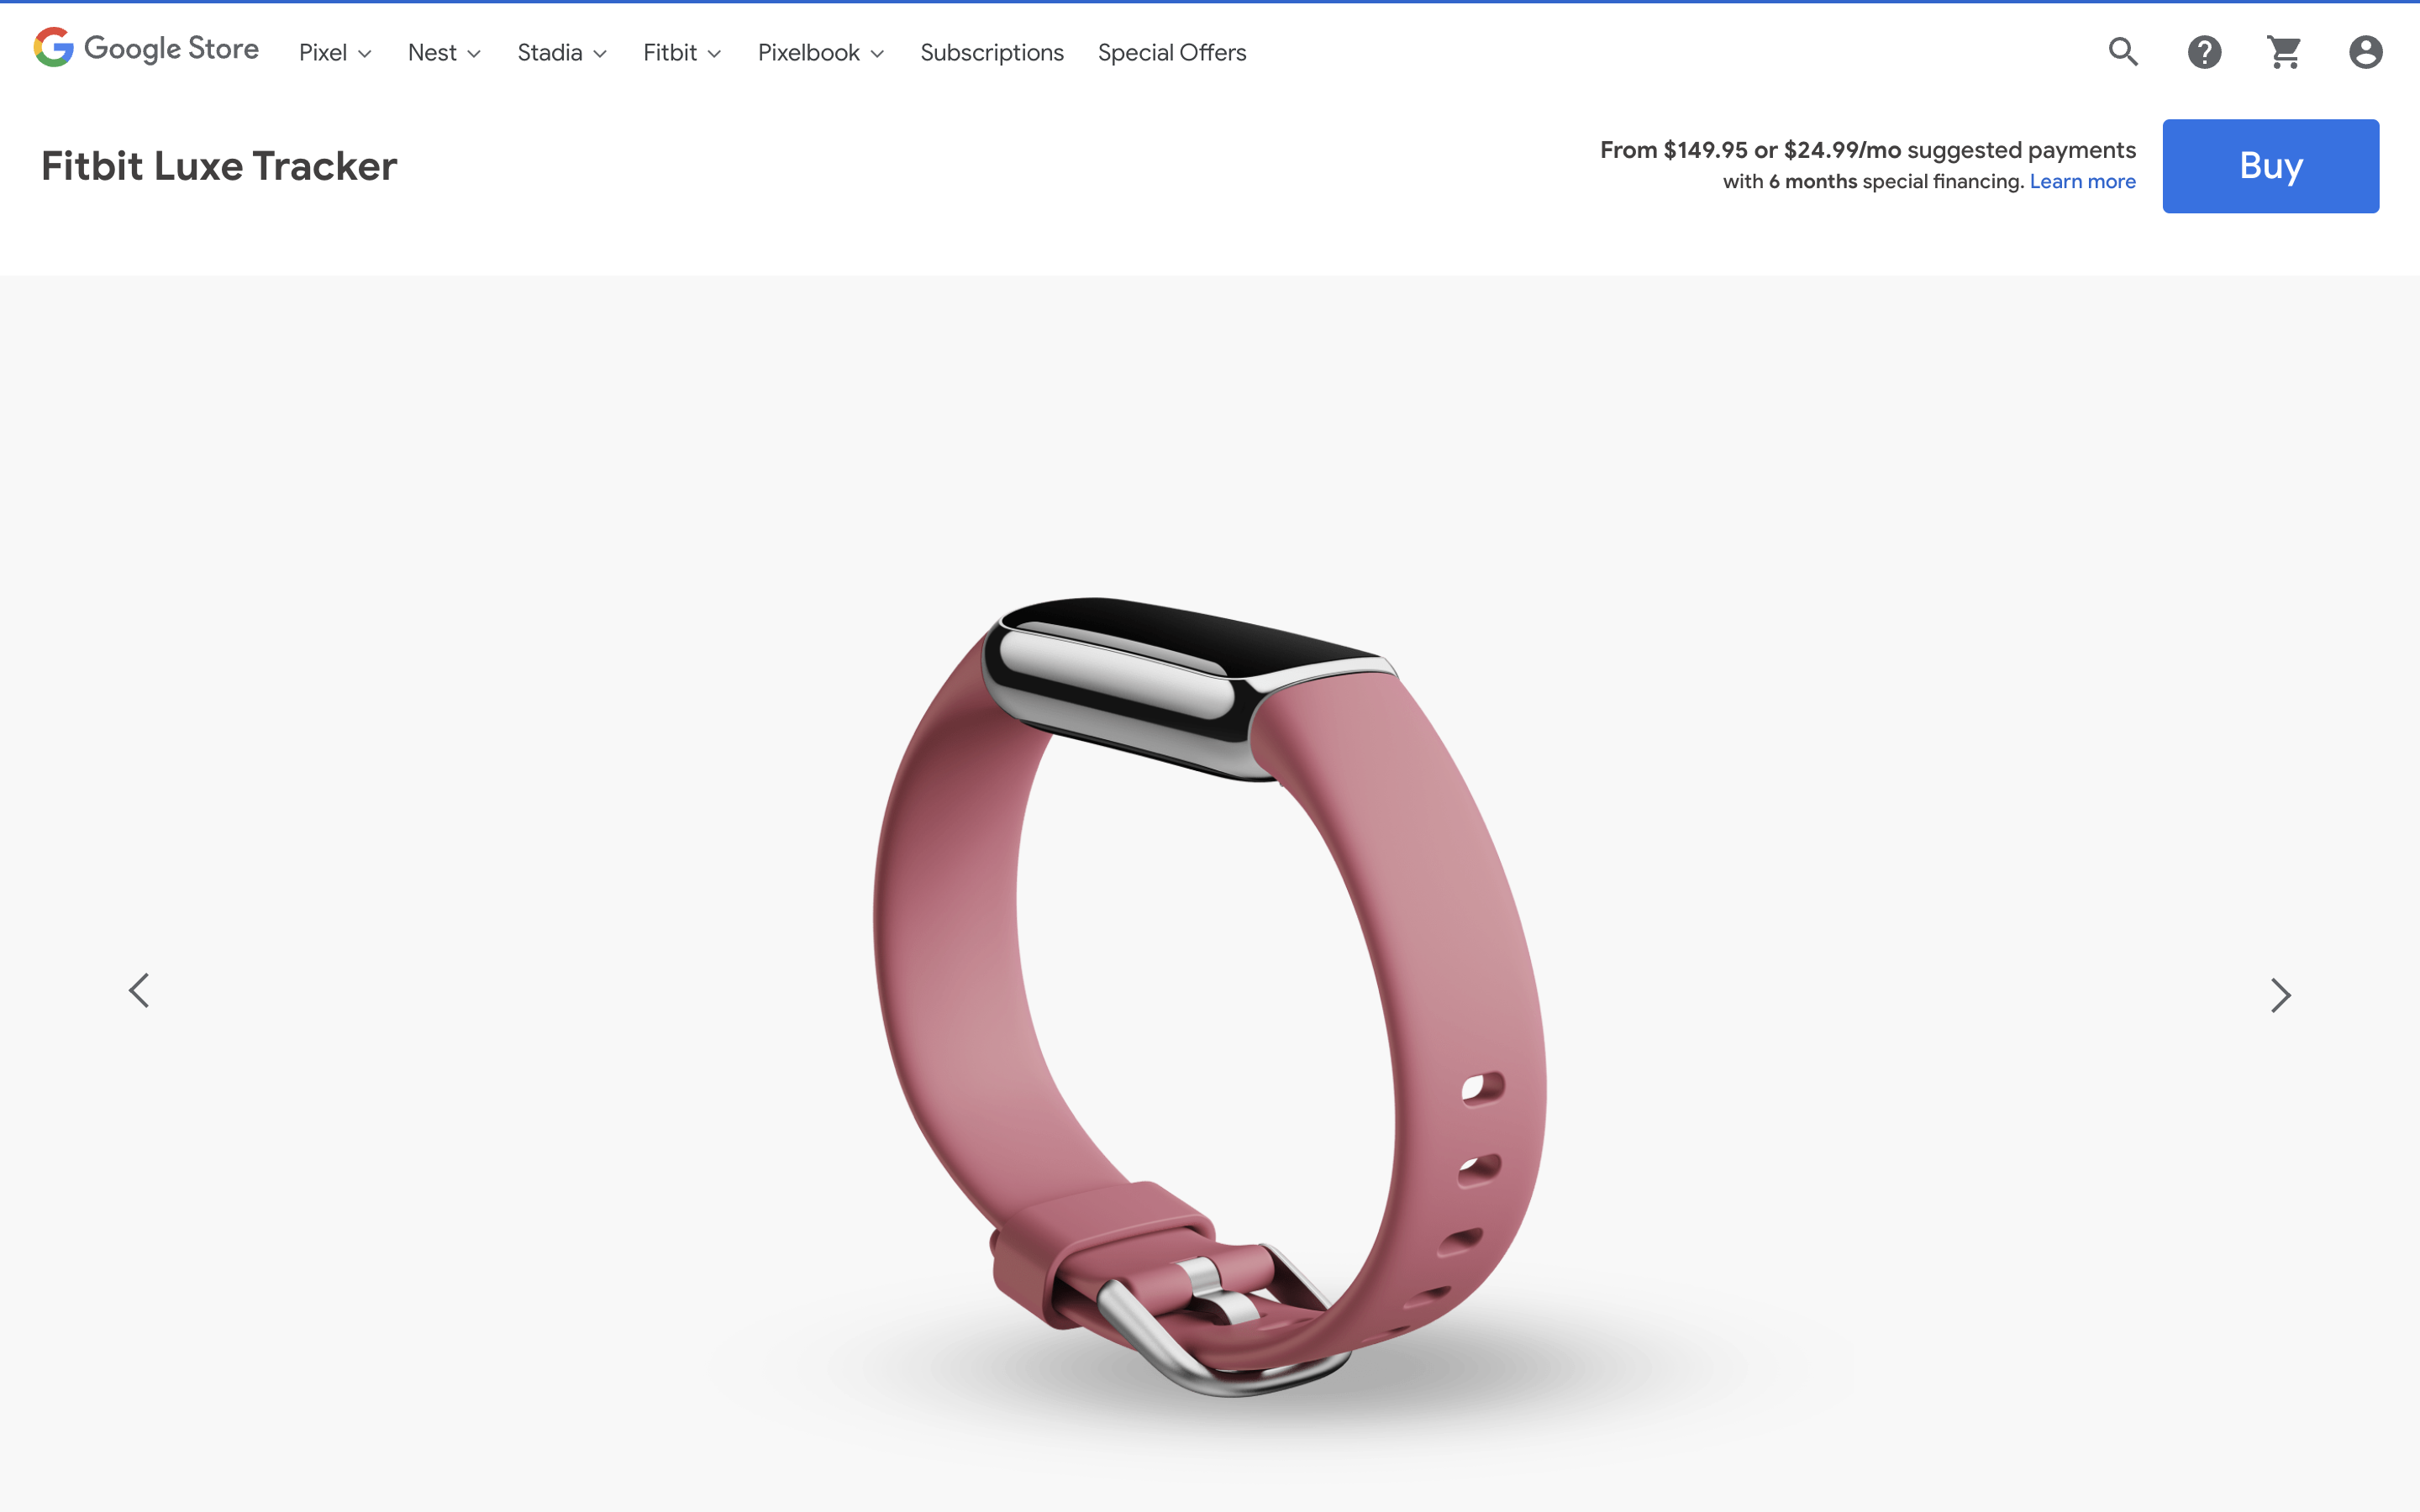 You can now buy the Fitbit Luxe from the Google Store